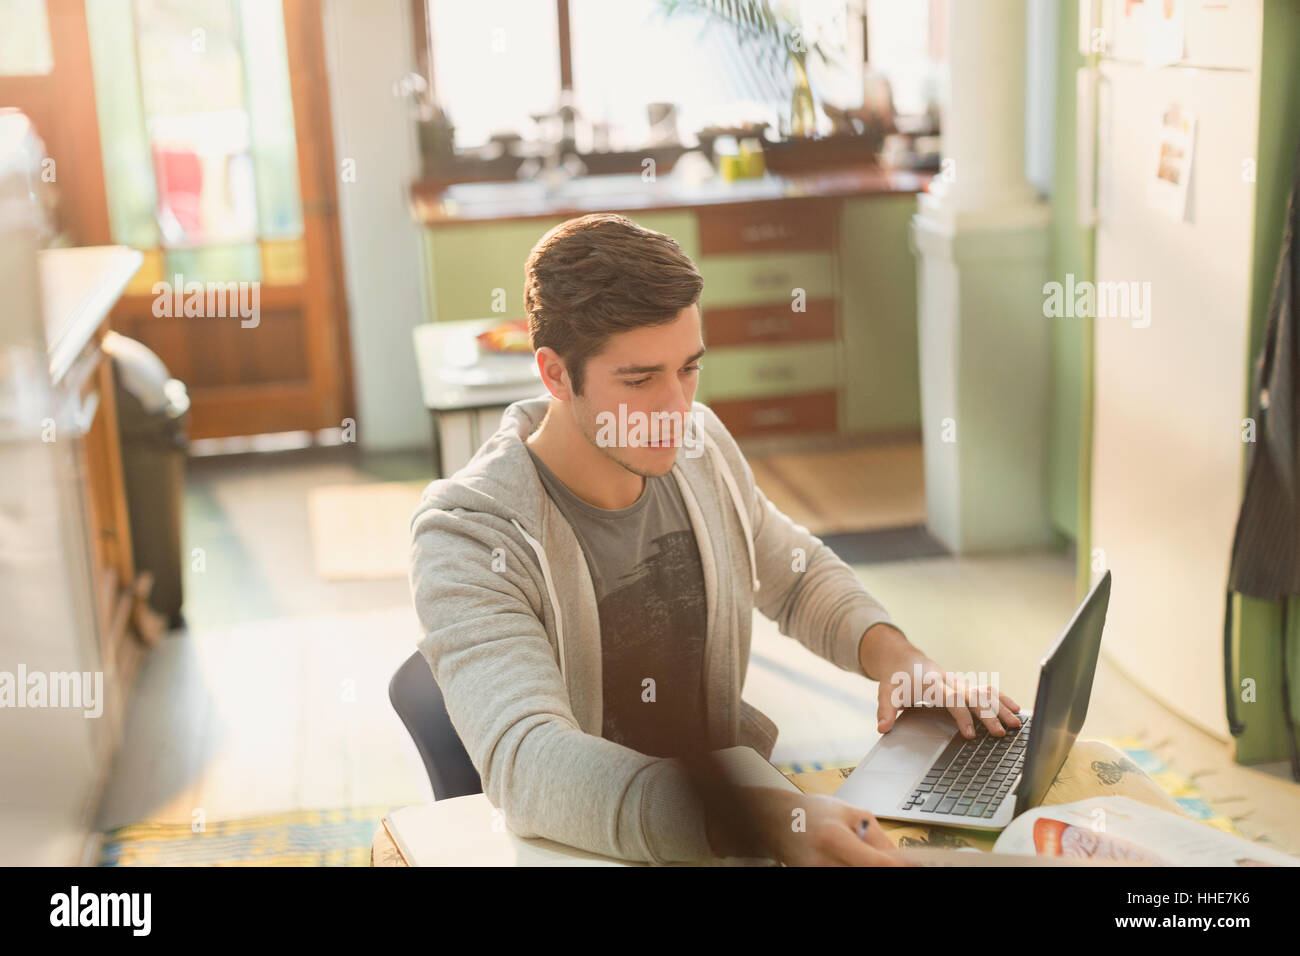 Young man college student studying at laptop in kitchen Stock Photo